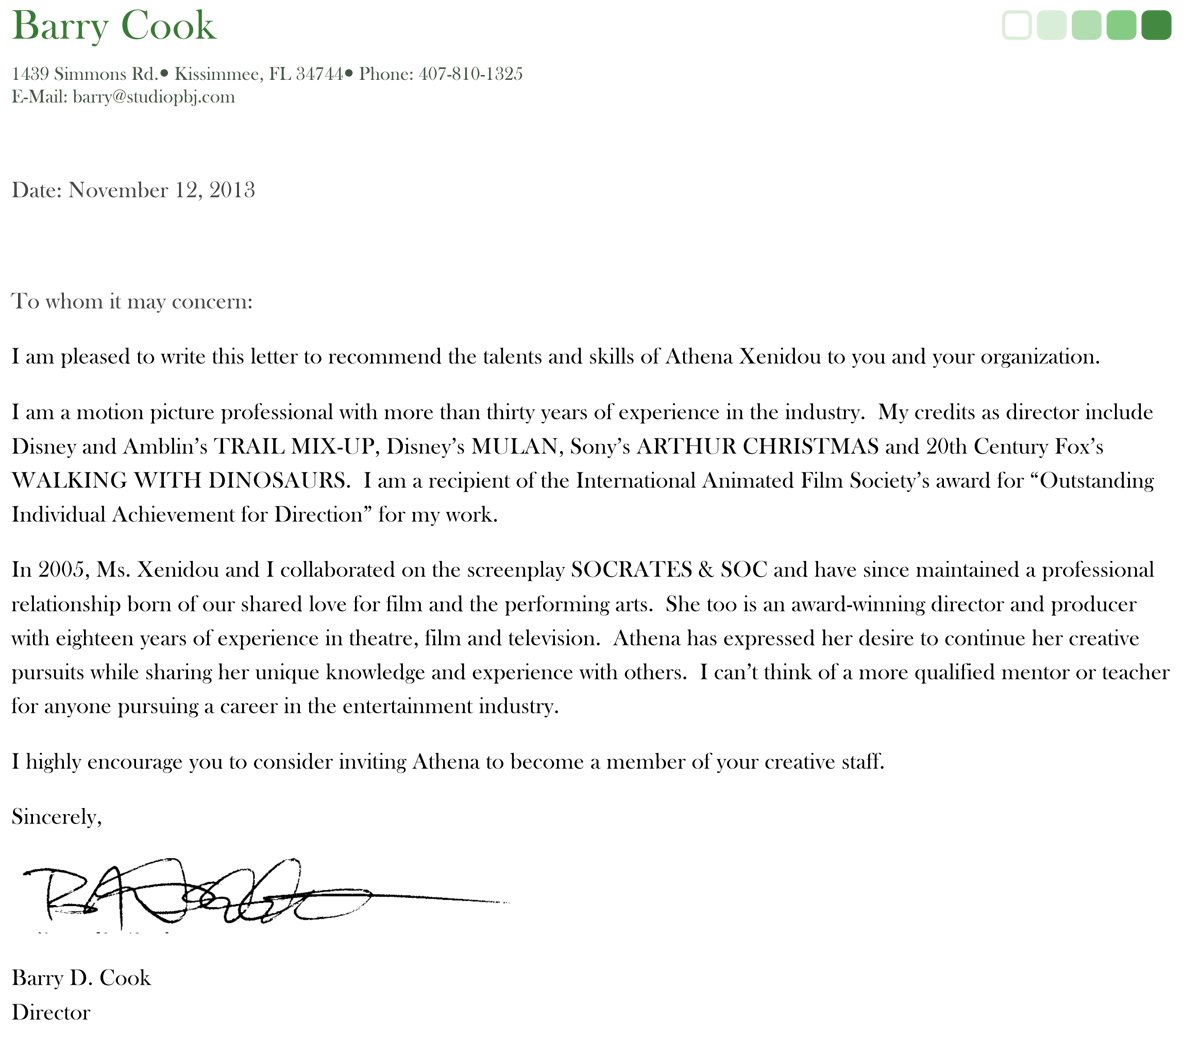 Barry Cook letter